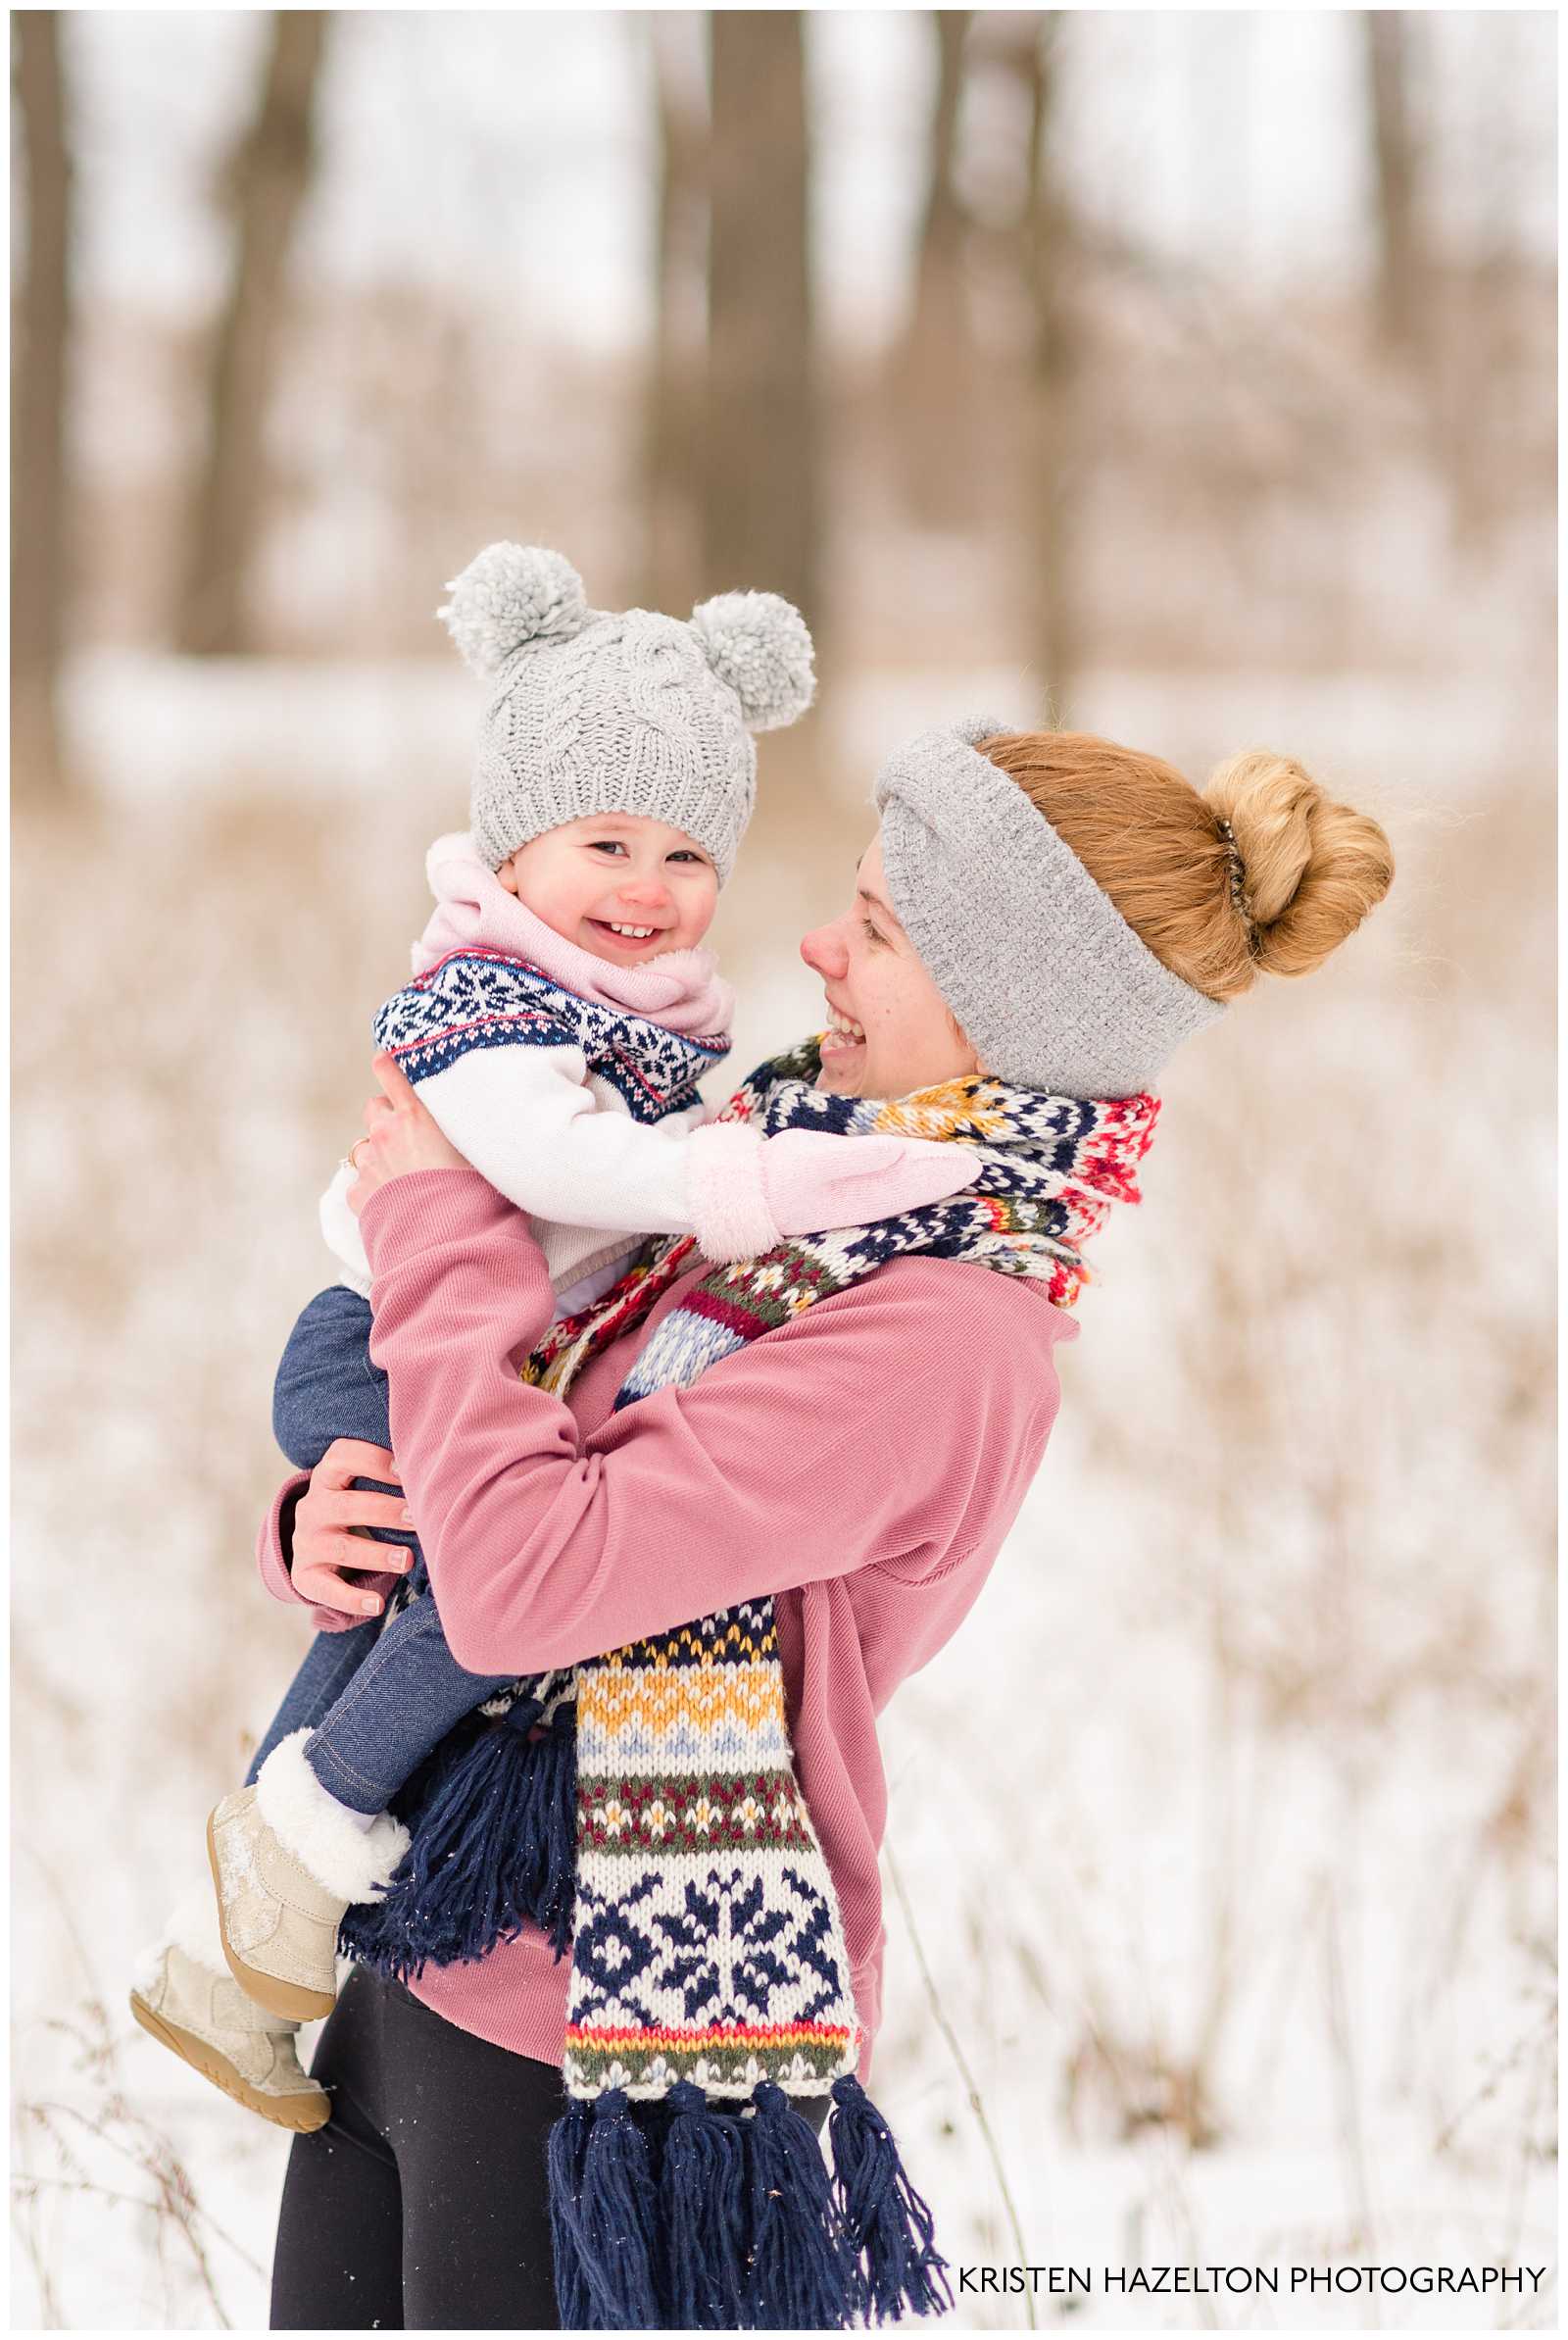 Mom hugging her toddler daughter in the snow